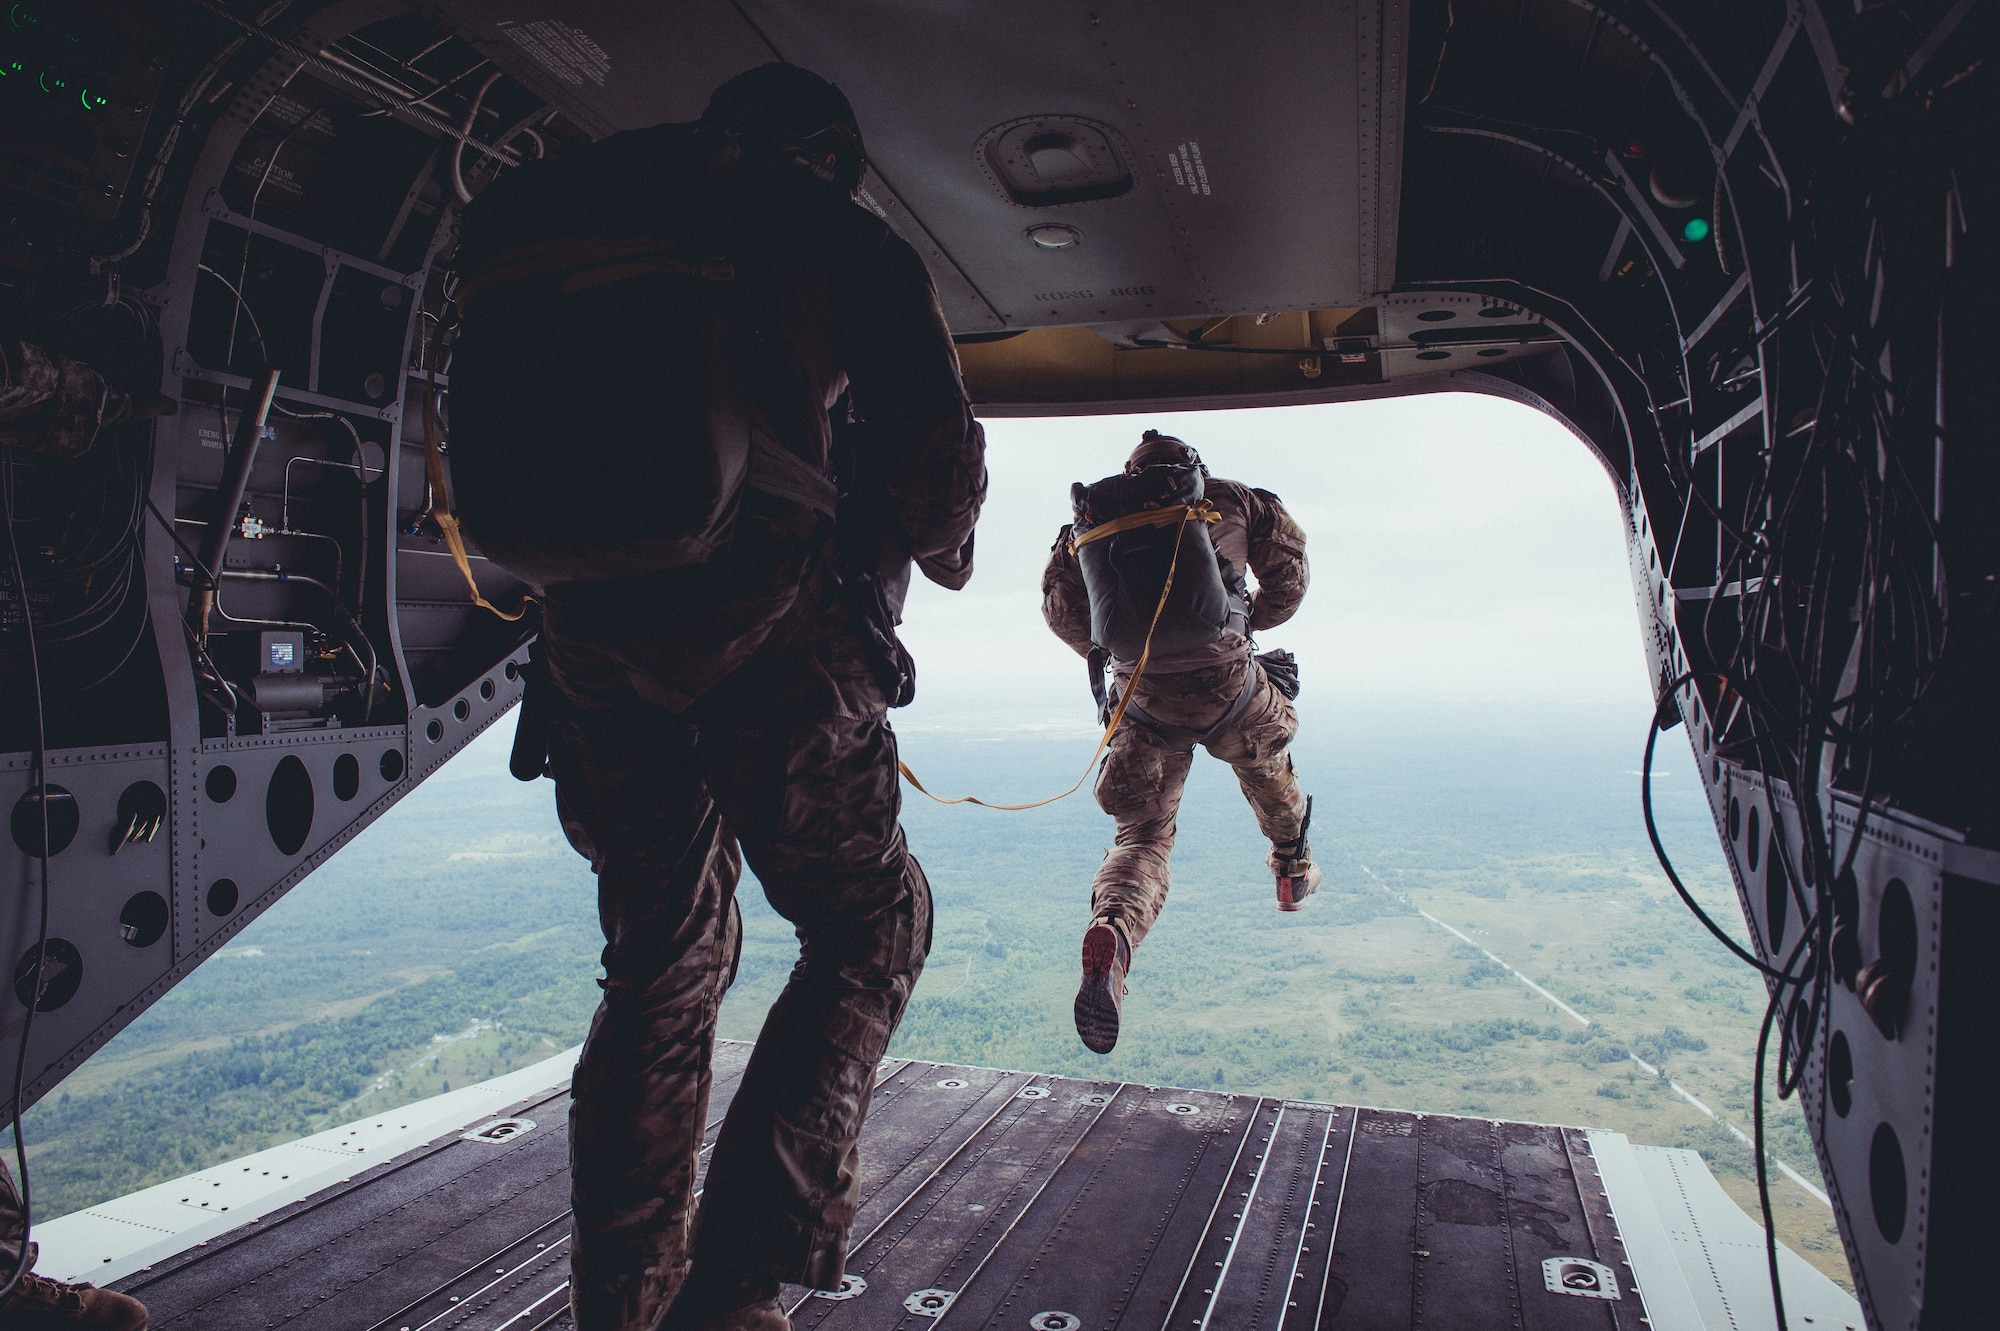 Airmen from the 274th Air Support Operations Squadron, Syracuse, N.Y., conduct air assault and parachute jump training out of a CH-47 Chinook helicopter from the 1-169th General Support Aviation Battalion, Rochester, N.Y., Sept. 10, 2016. The training is part of an annual requirement for parachute jumps, and a larger exercise involving the Civil Air Patrol acting as close air support. (U.S. Air Force photo by Staff Sgt. Ryan Campbell)